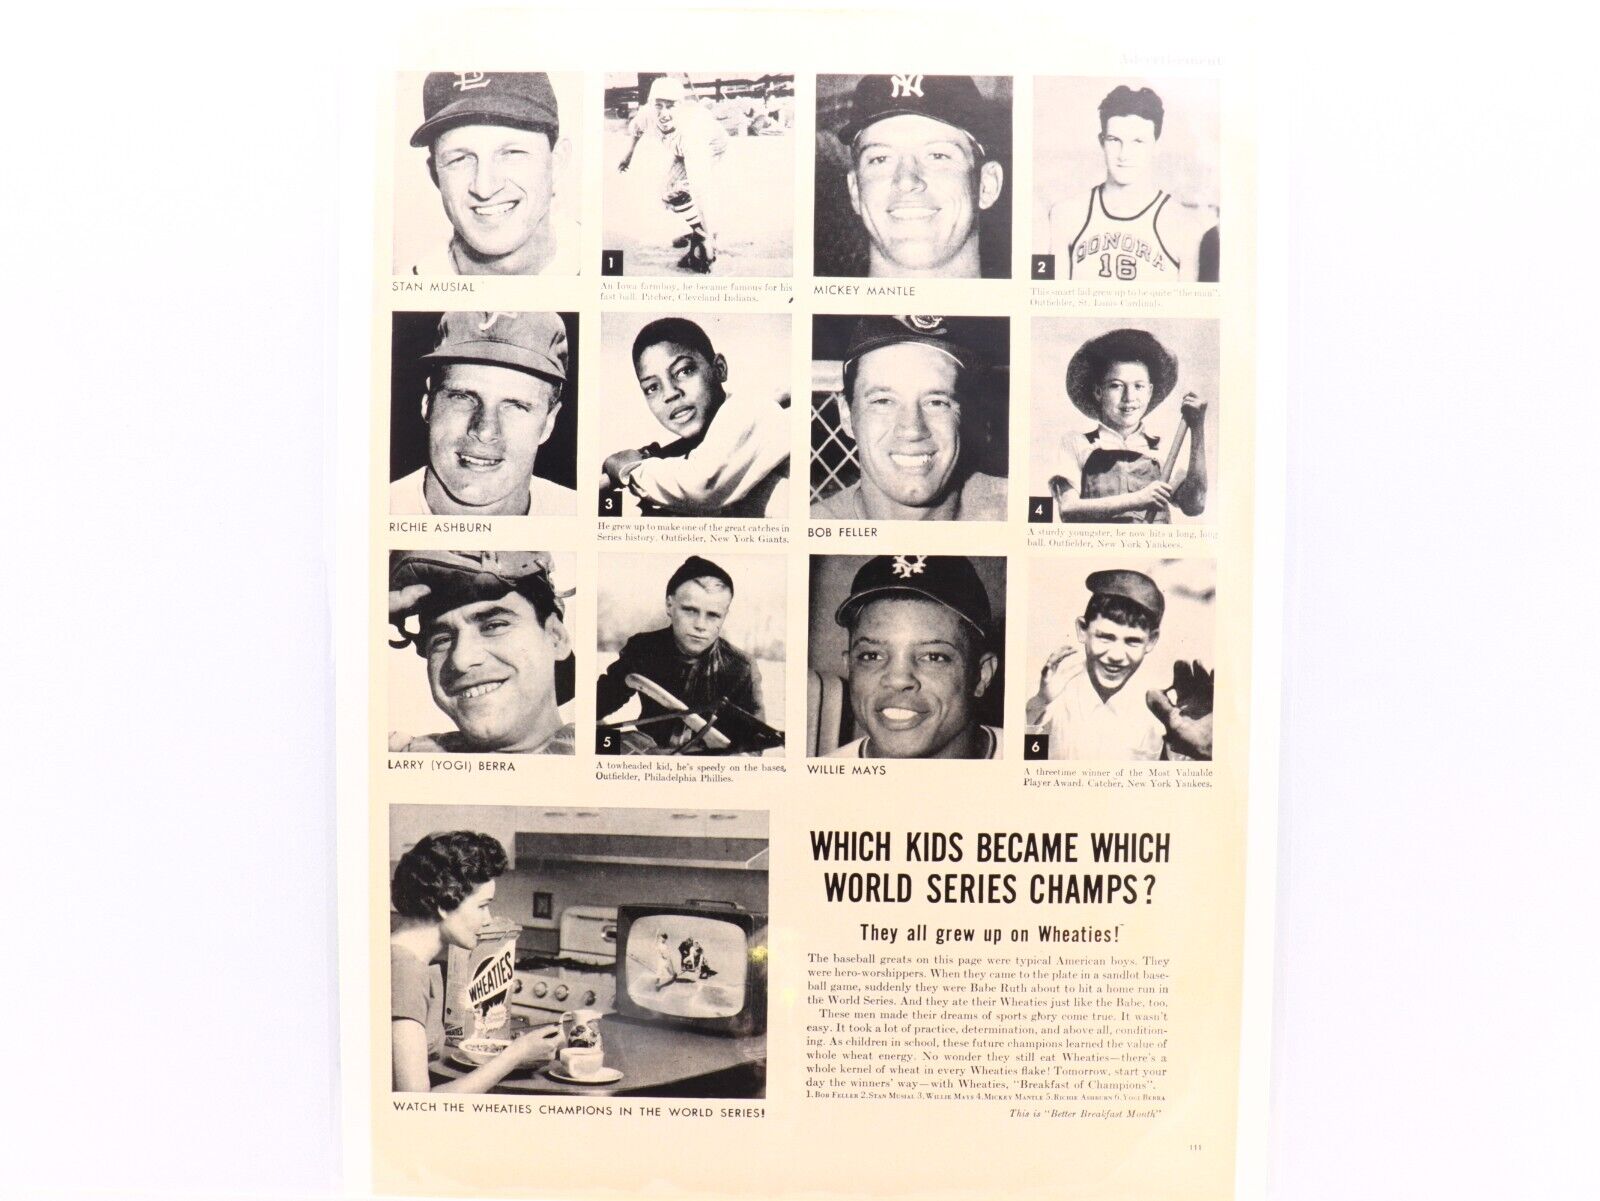 1956 Wheaties Ad Showing Photos Of 6 World Series Champs With Childhood Photos.